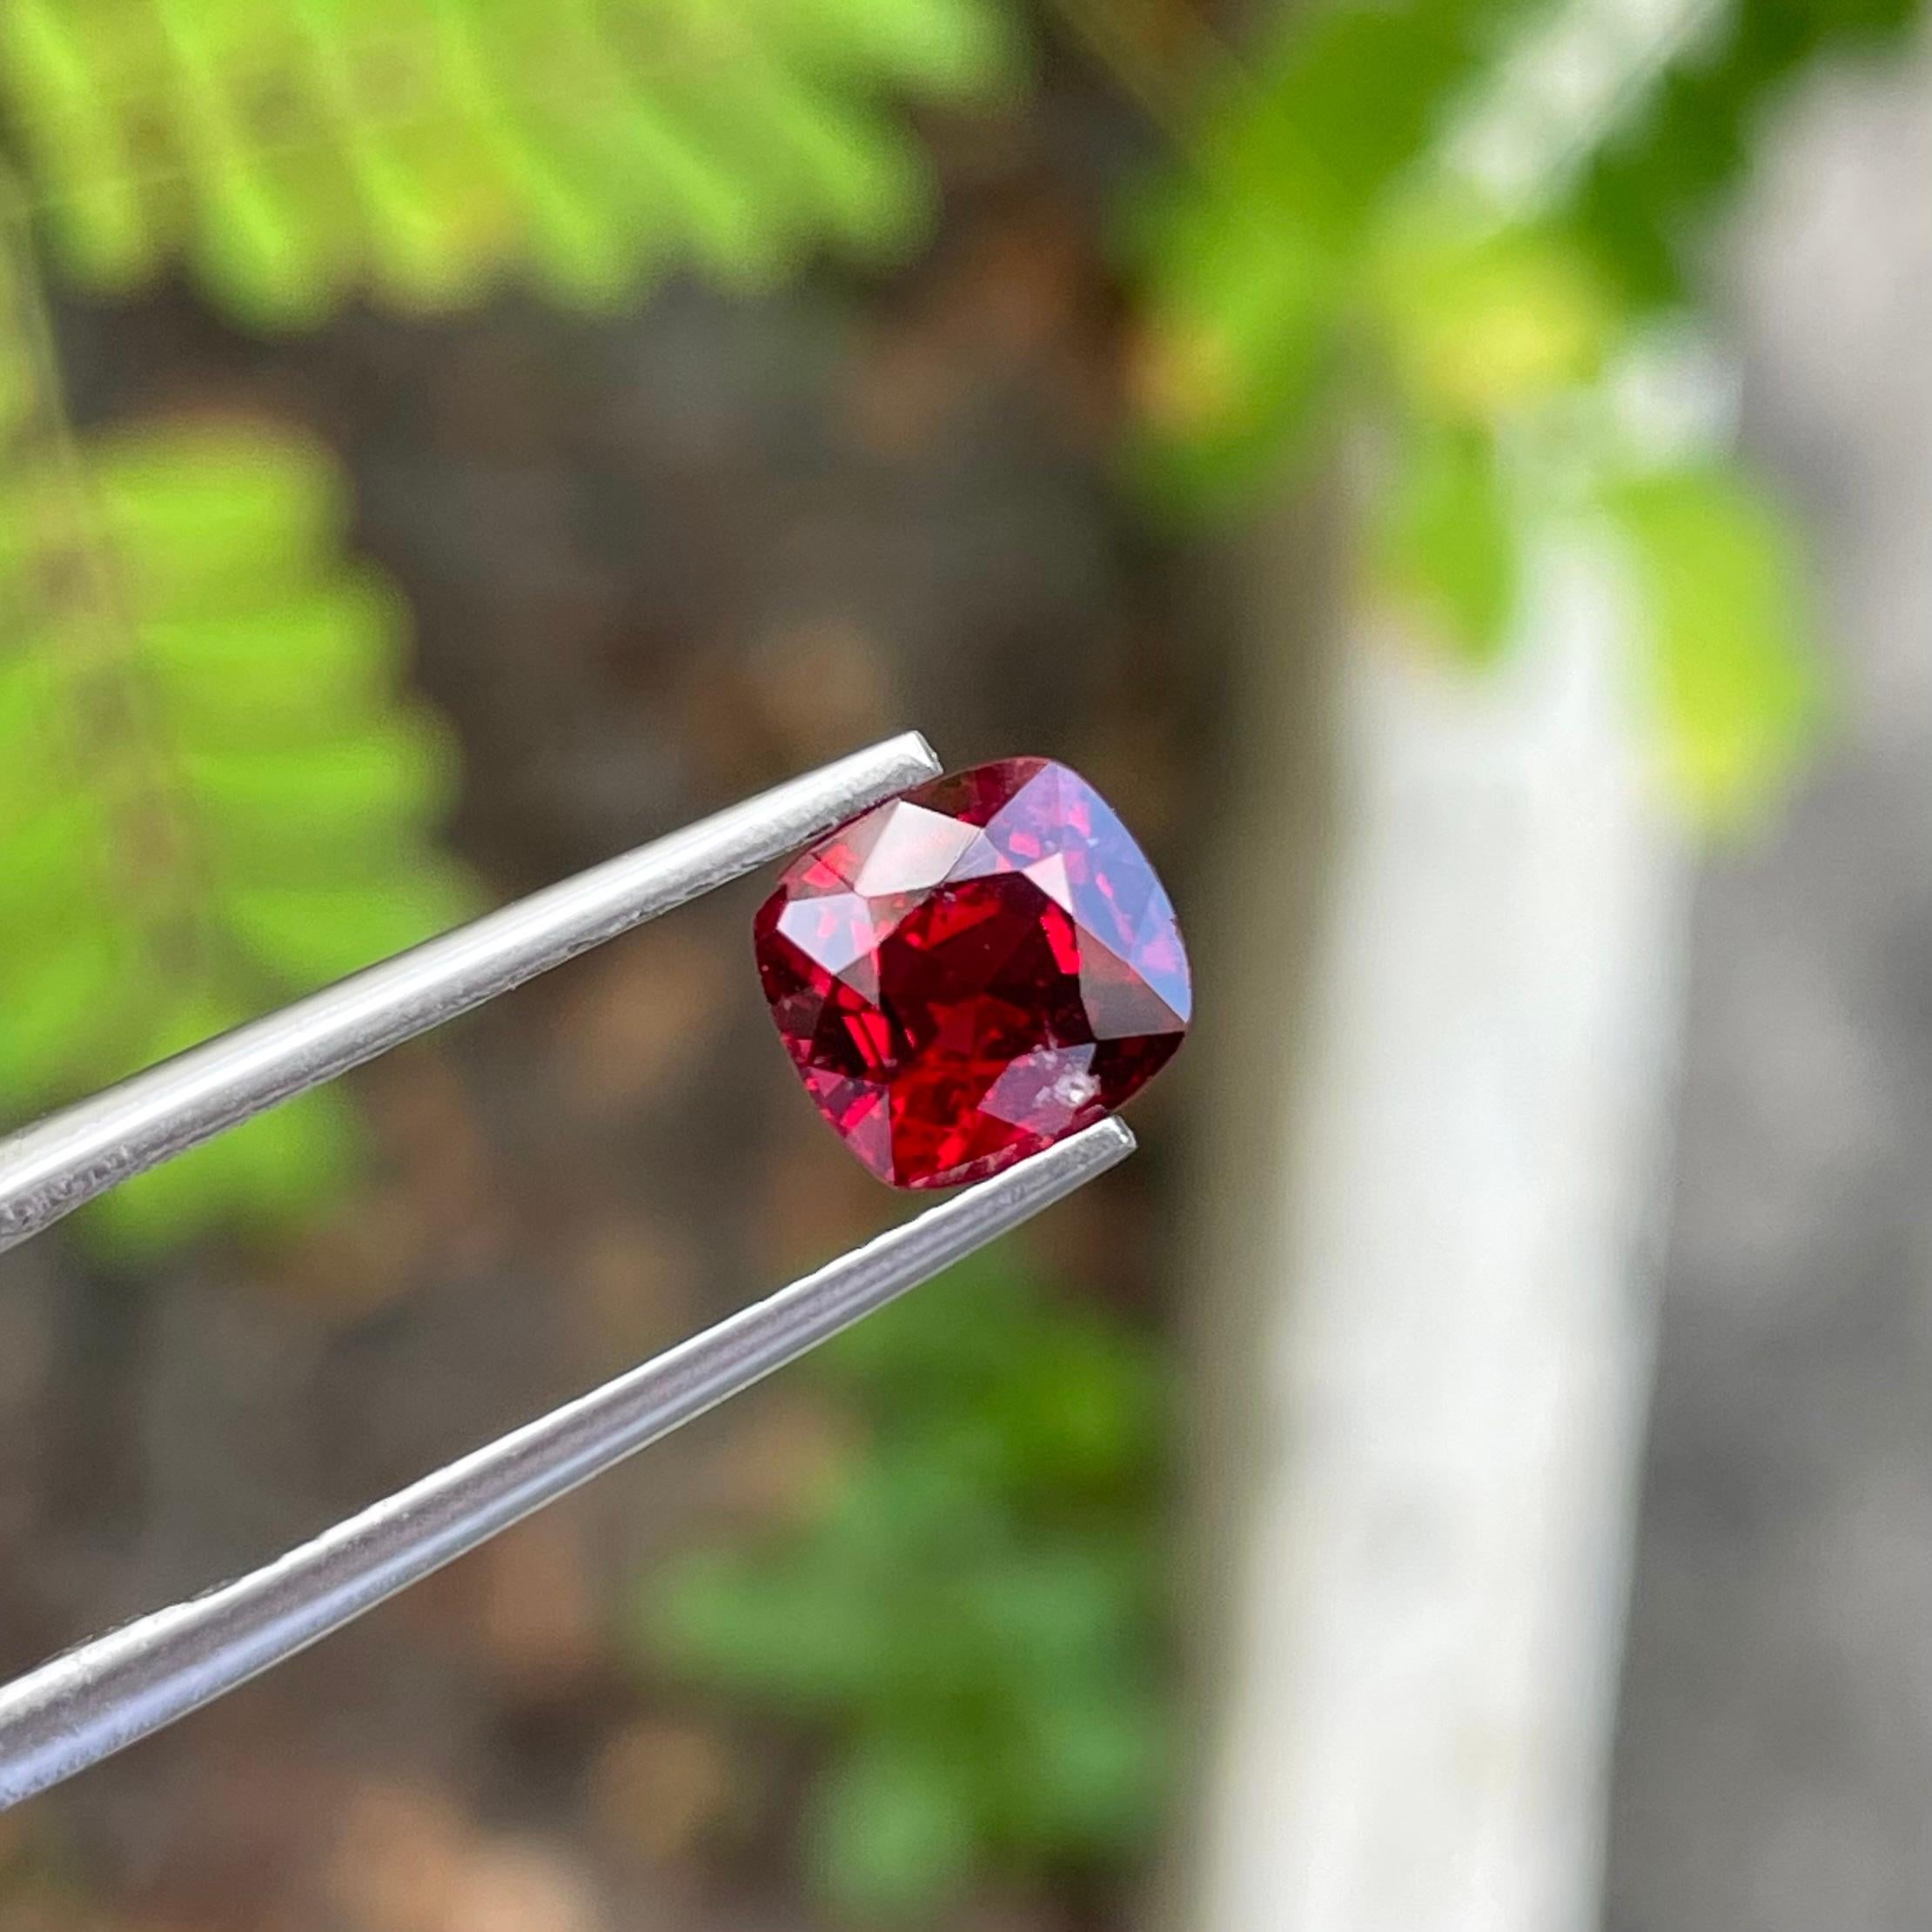 Weight 1.55 carats 
Dimensions 6.95 x 6.50 x 4.40 mm
Treatment None 
Origin Burma 
Clarity SI (Slightly Included)
Shape Cushion 
Cut Fancy Cushion 



Elevate your jewelry collection with the exquisite beauty of this Red Burmese Spinel, a natural